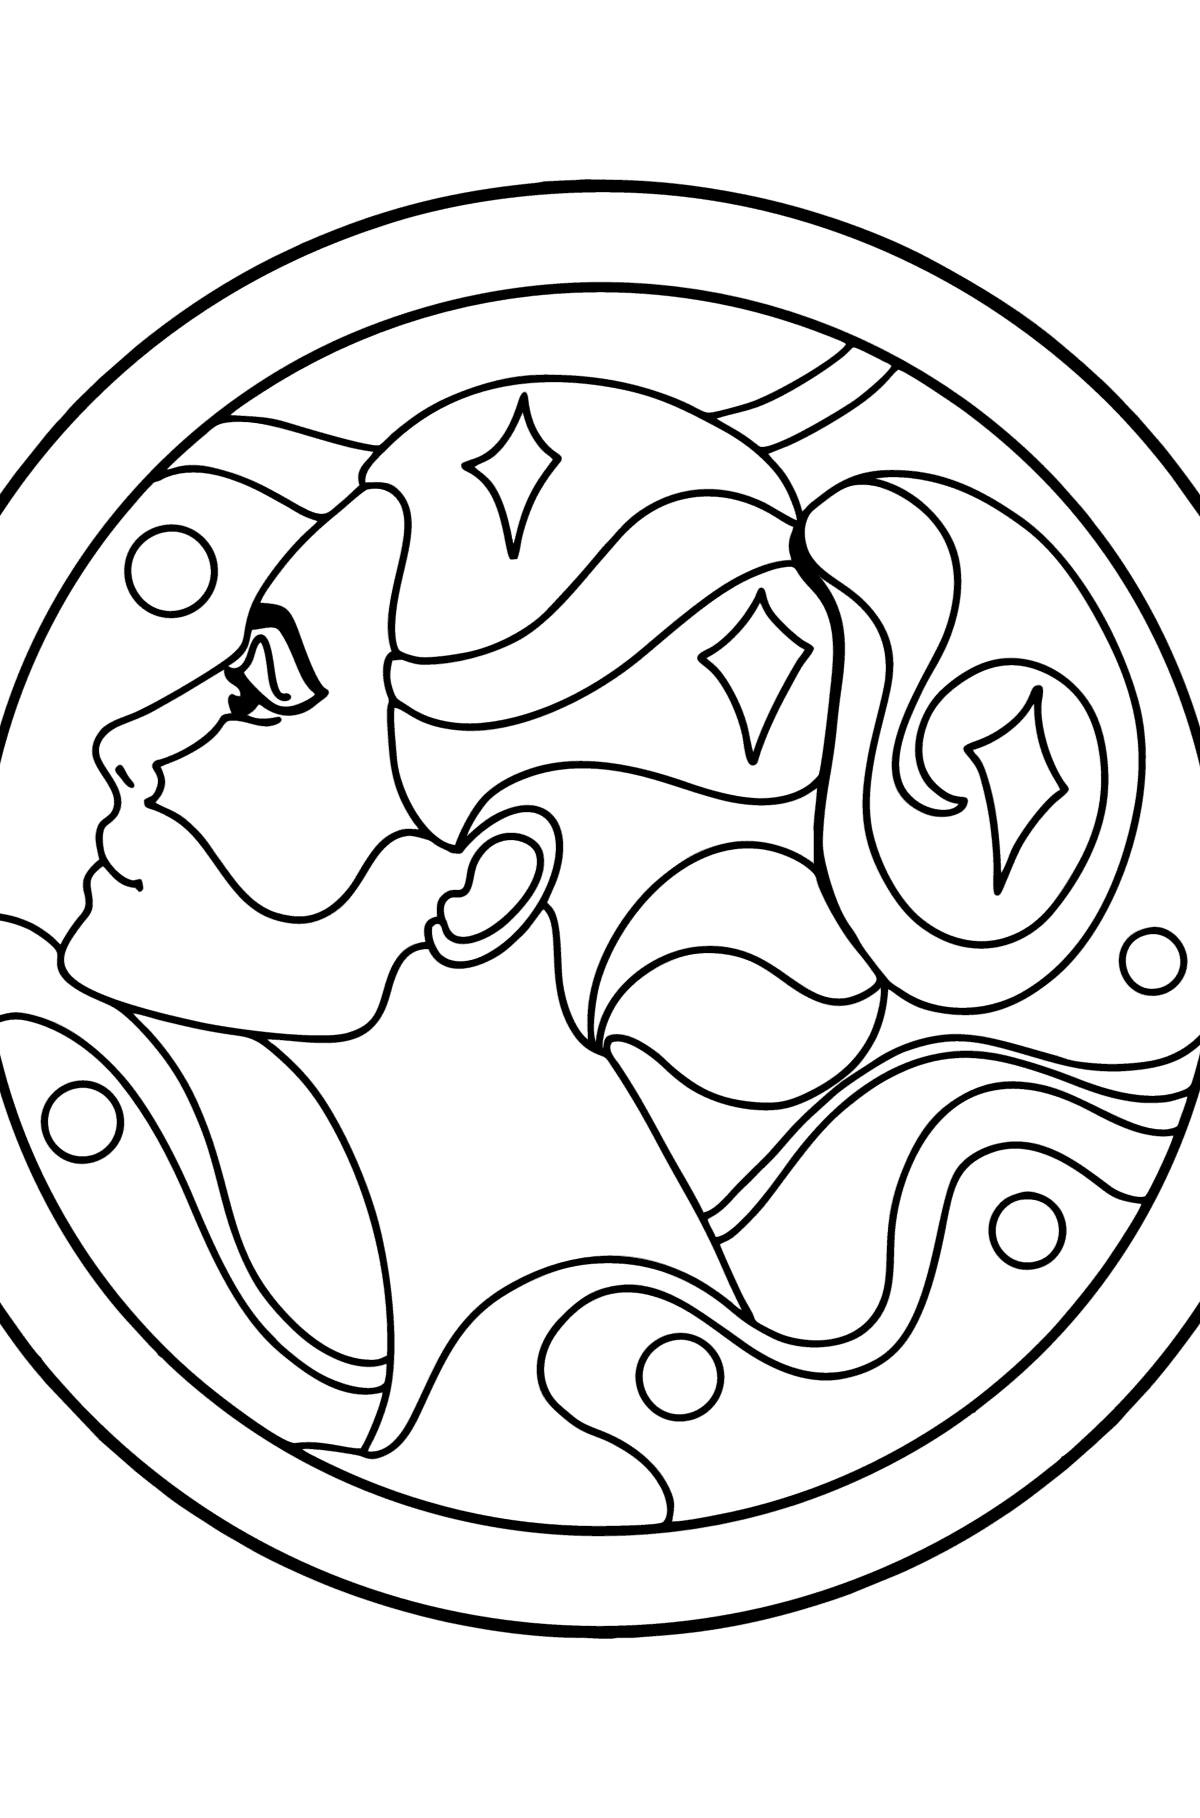 Coloring page for kids - zodiac sign Virgo - Coloring Pages for Kids